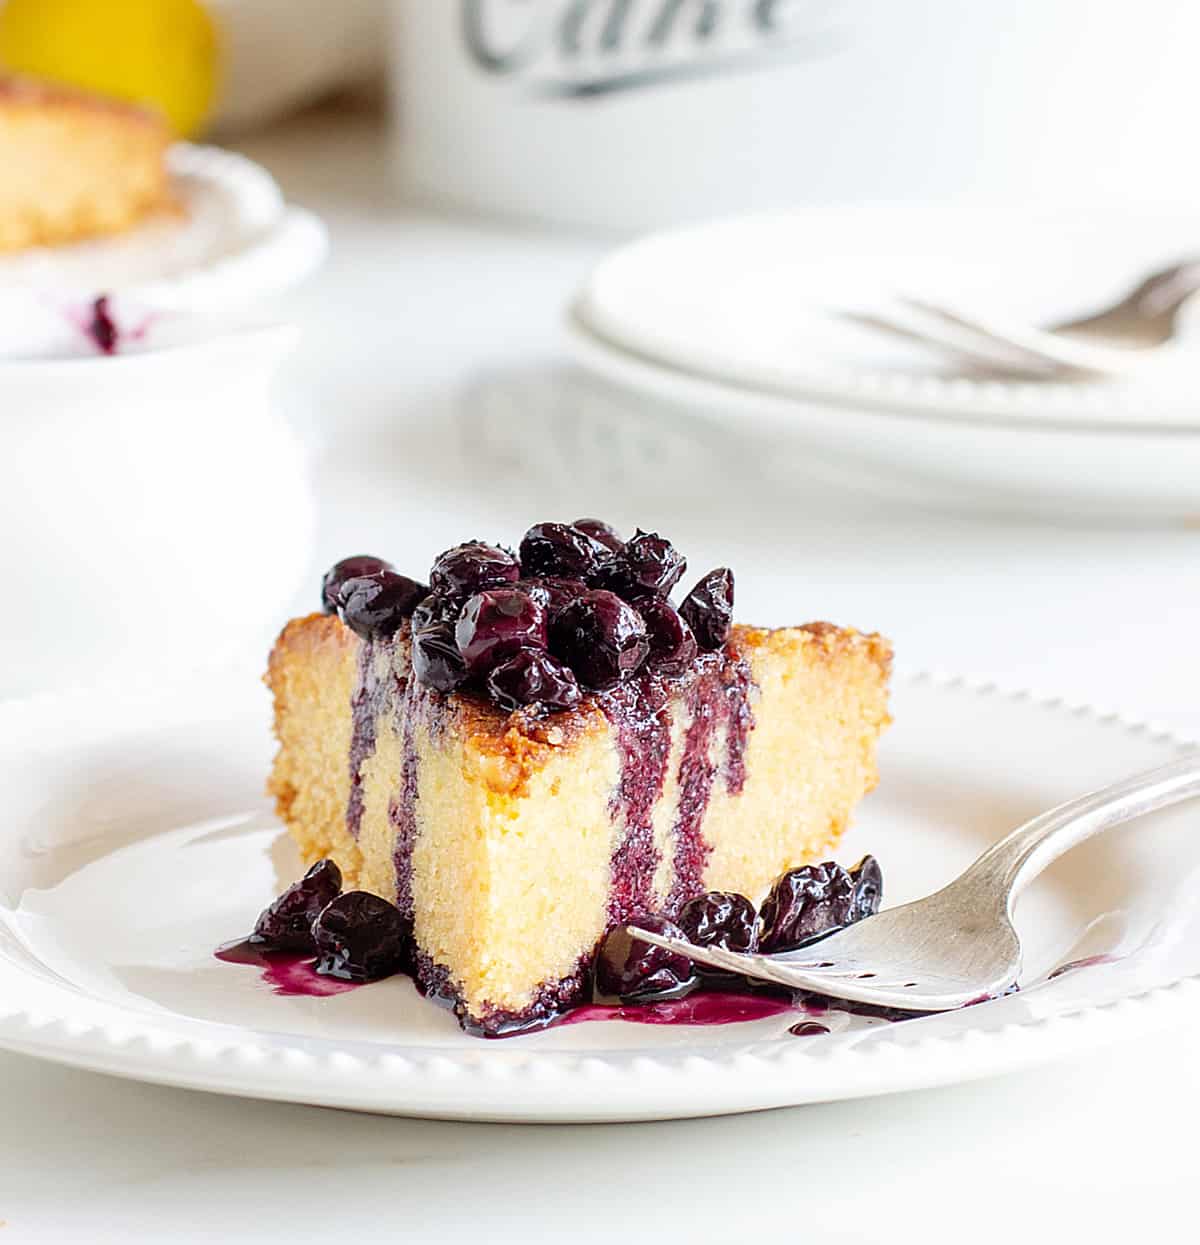 Slice of lemon cake with blueberry sauce on white plate, silver fork, white props in the background.